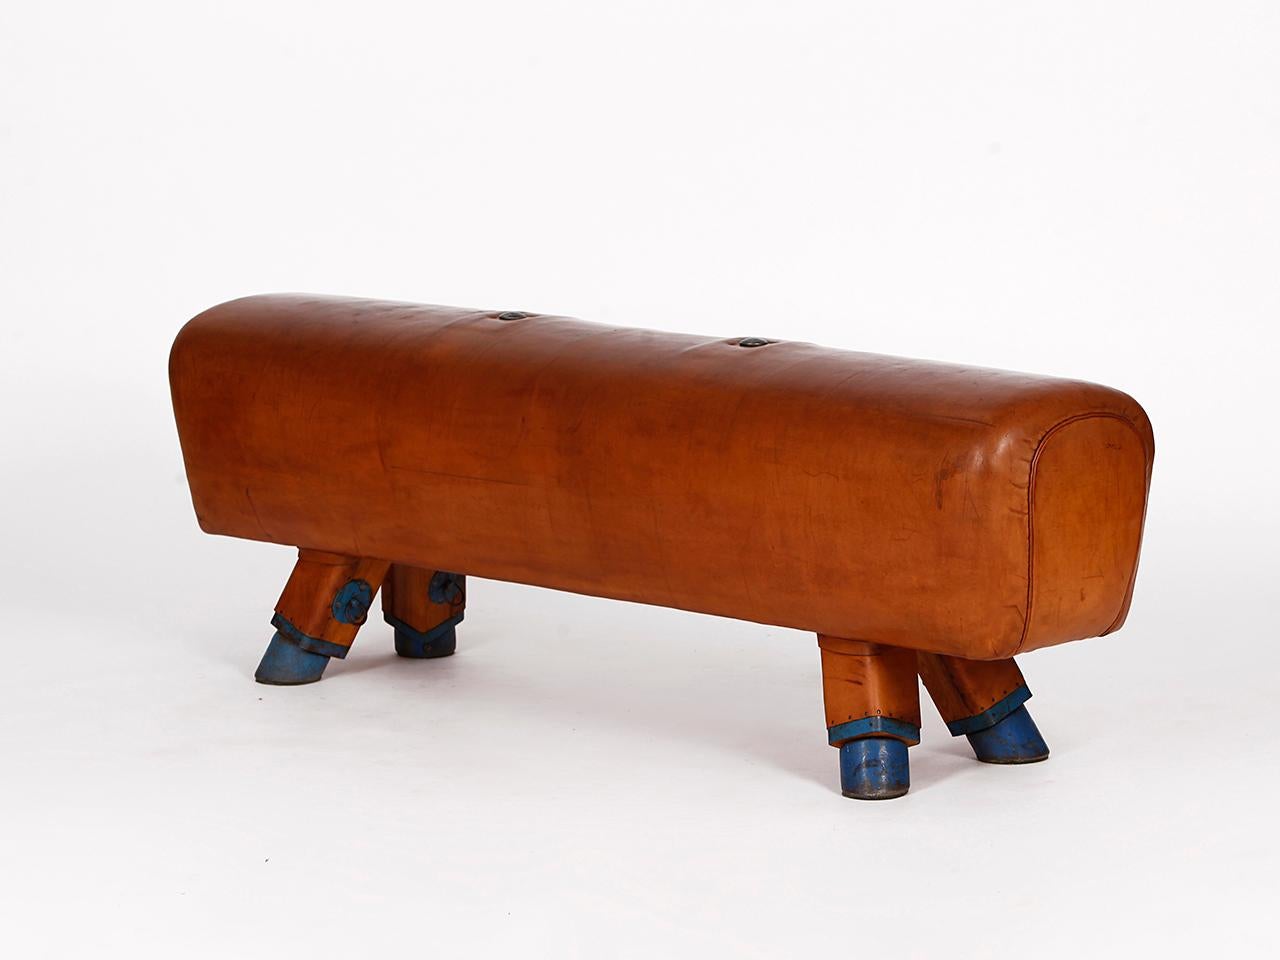 Pommel horse from former Czechoslovakia from the 1930s with beautiful patina, shortened to bench height 53cm and very good vintage condition. Completely restored. The iron feet are preserved. The thick leather has been cleaned and preserved. All of